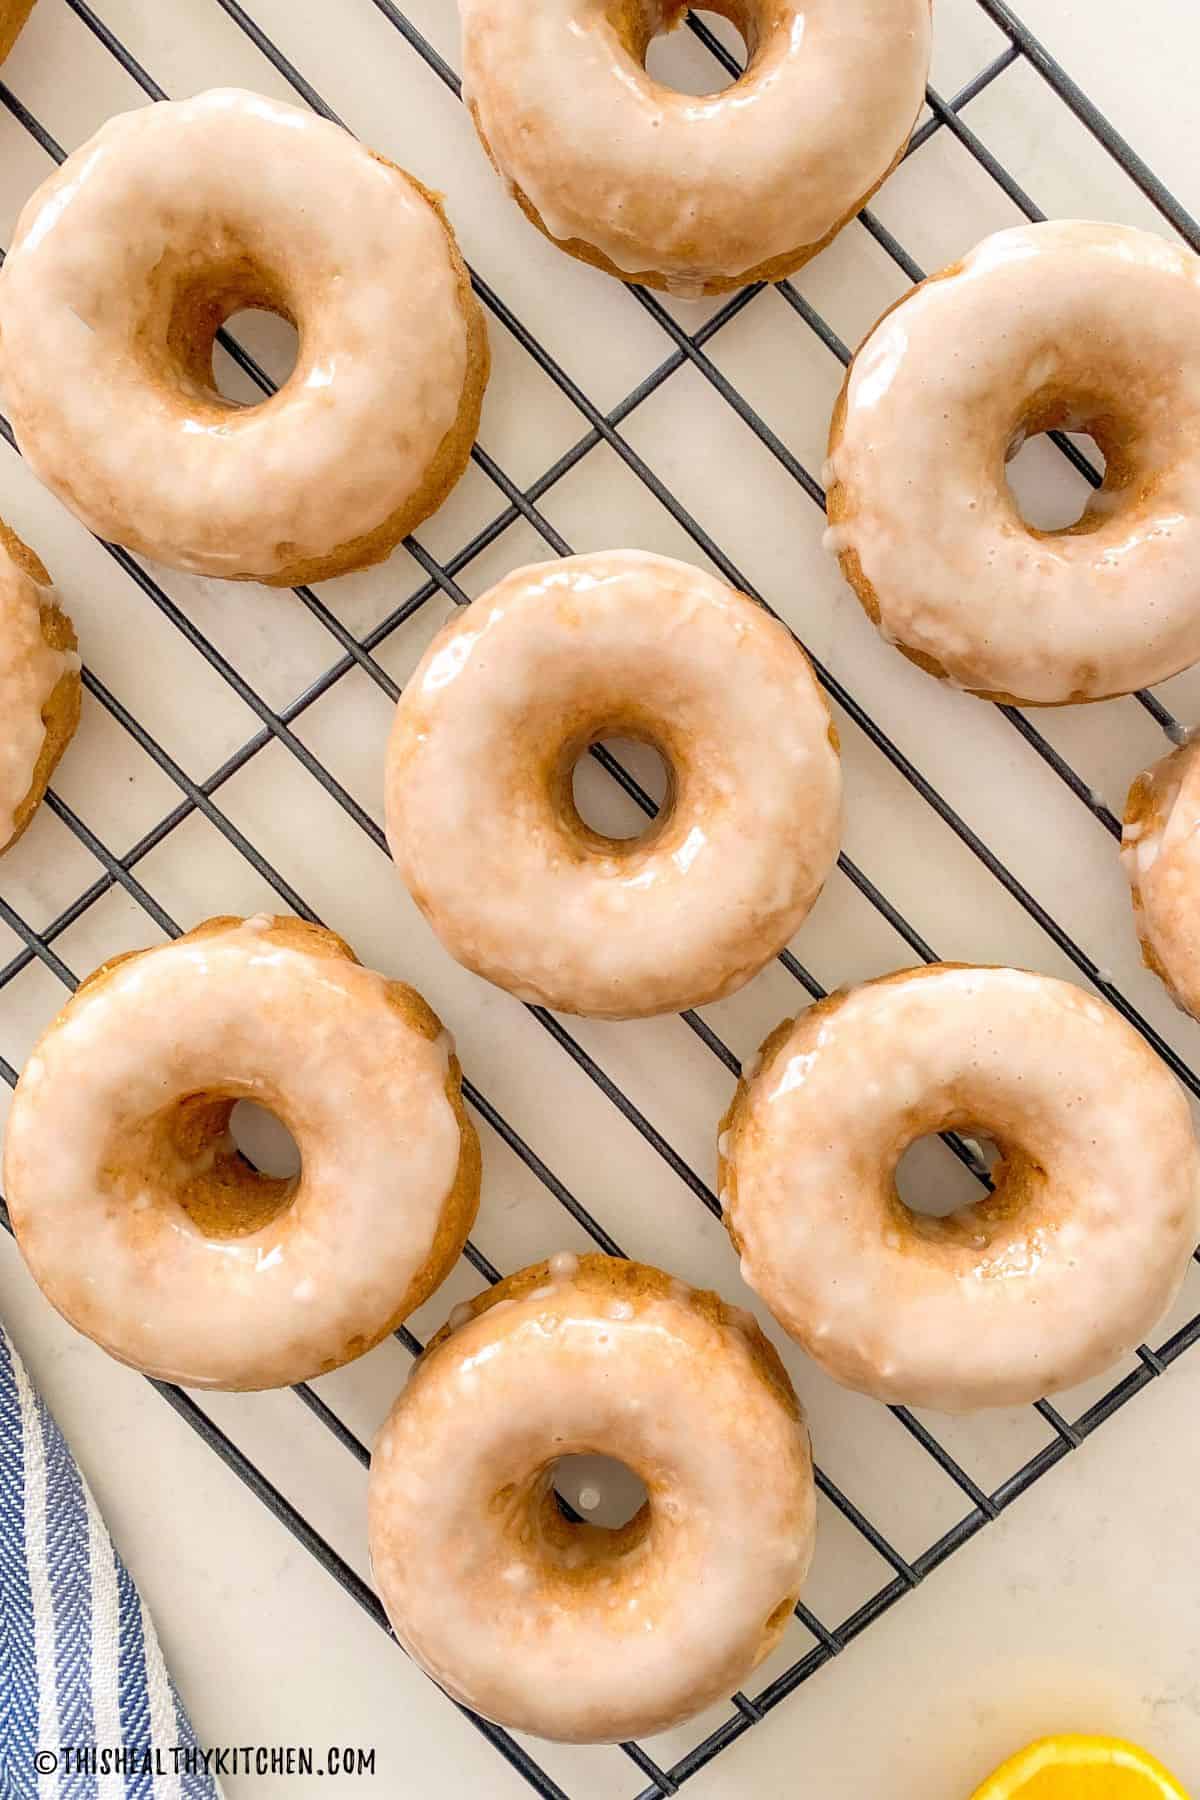 Donuts with glaze on top resting on cooling rack.